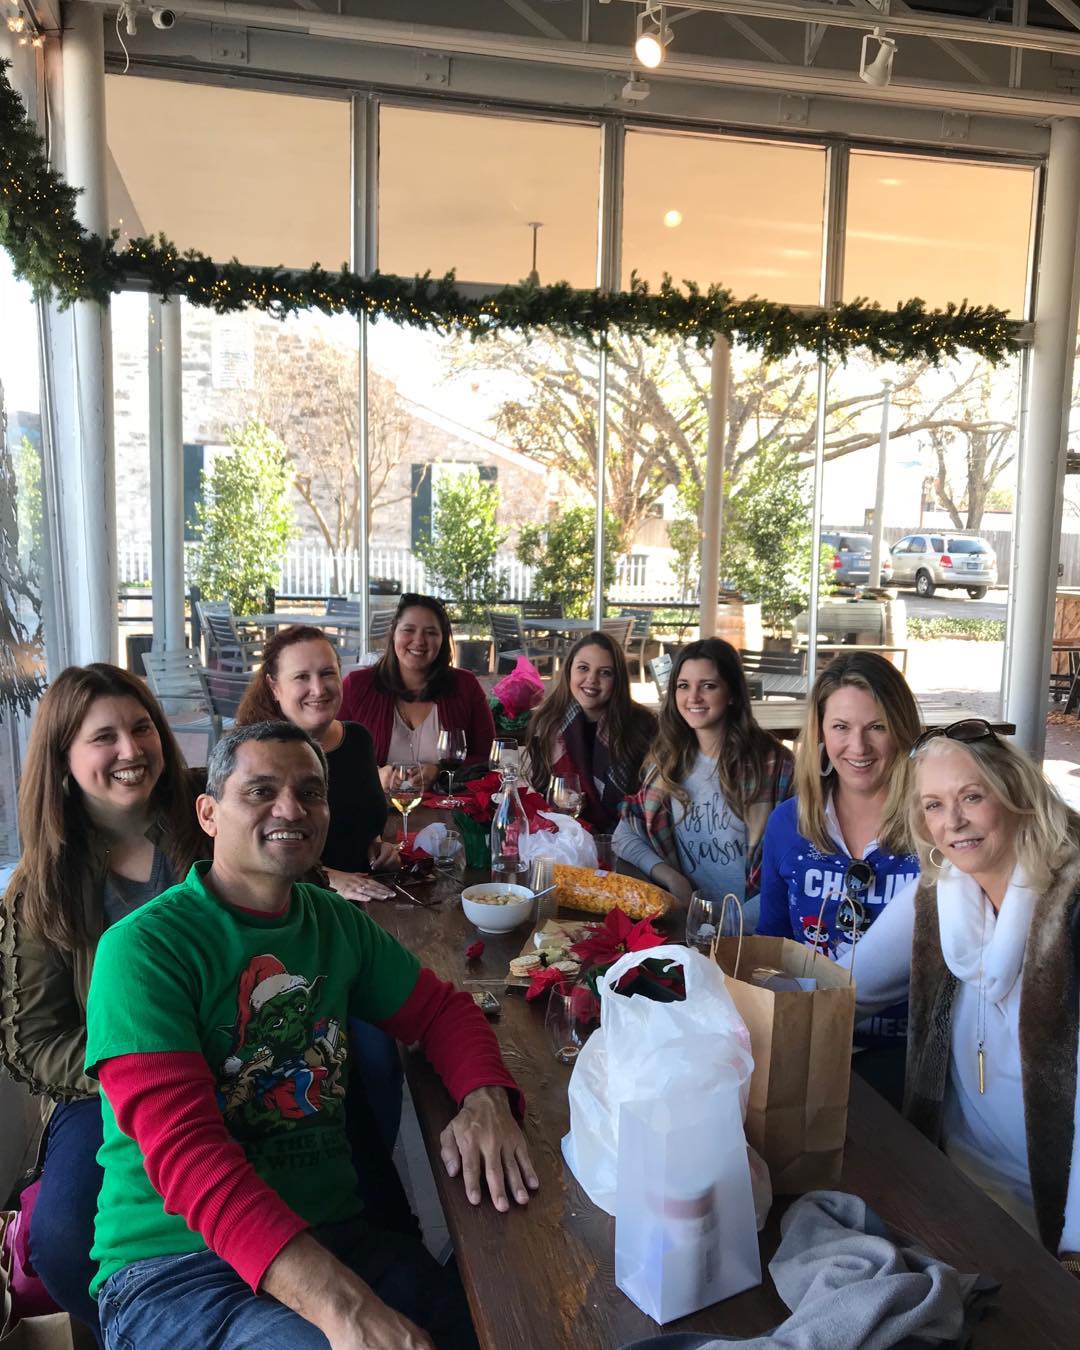 ❤️ these humans!  Celebrated the holidays yesterday with our annual shopping trip to Fredericksburg. #bestemployees #holidayparty #companyparty